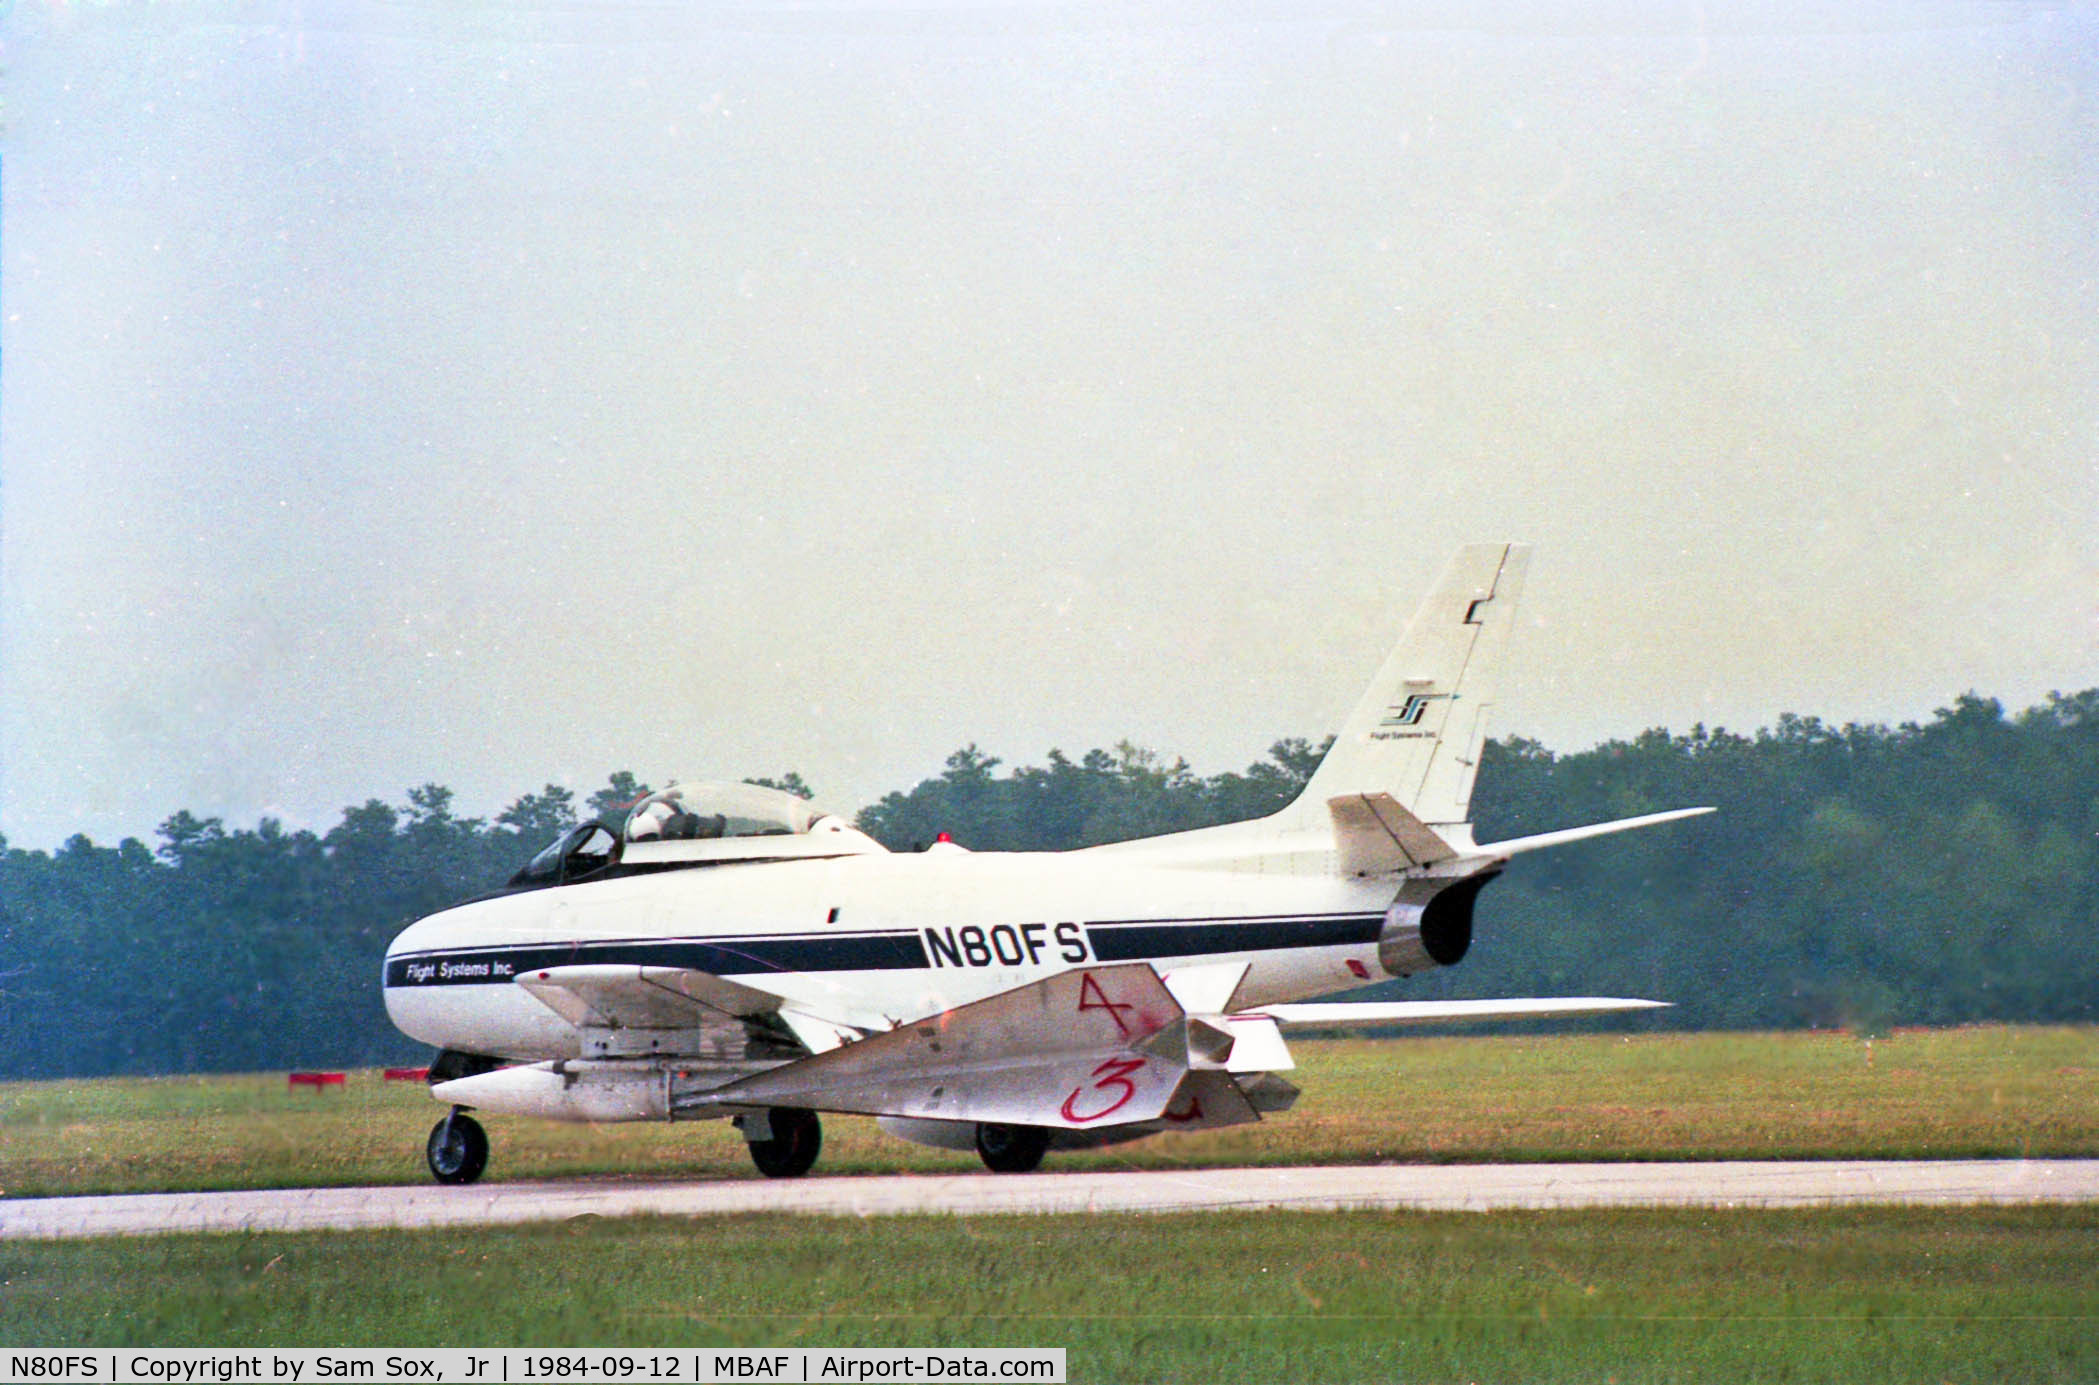 N80FS, 1958 Canadair CL-13B Sabre 6 C/N S6-1675, While visiting MBAFB Myrtle Beach, SC September of 1984, photographed N80FS who was there flying aerial target missions for the 354th FG A-10s  based there at the time.